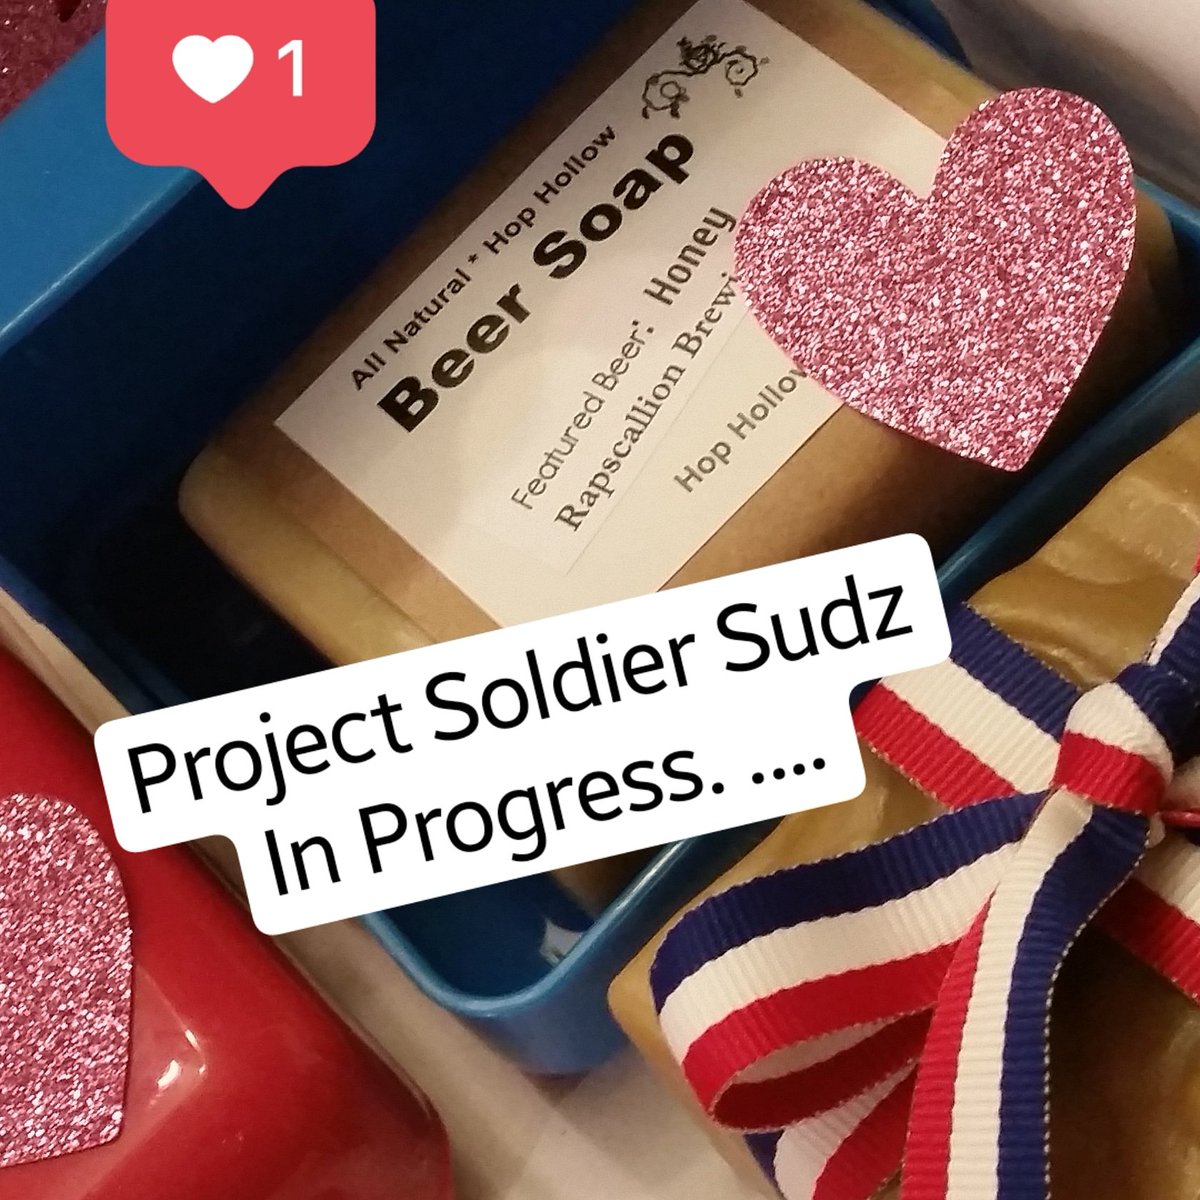 Inspired by Black Ale Project,  we thought we would show a little Soldier Love of our own. #Armystrong #freedomisntfree #hoppymagic #beersoap #soldier #beernerd #hoppymagic #ValentinesDay #craftbeer #localbrew #hops #mabeer #love #naturalsoap